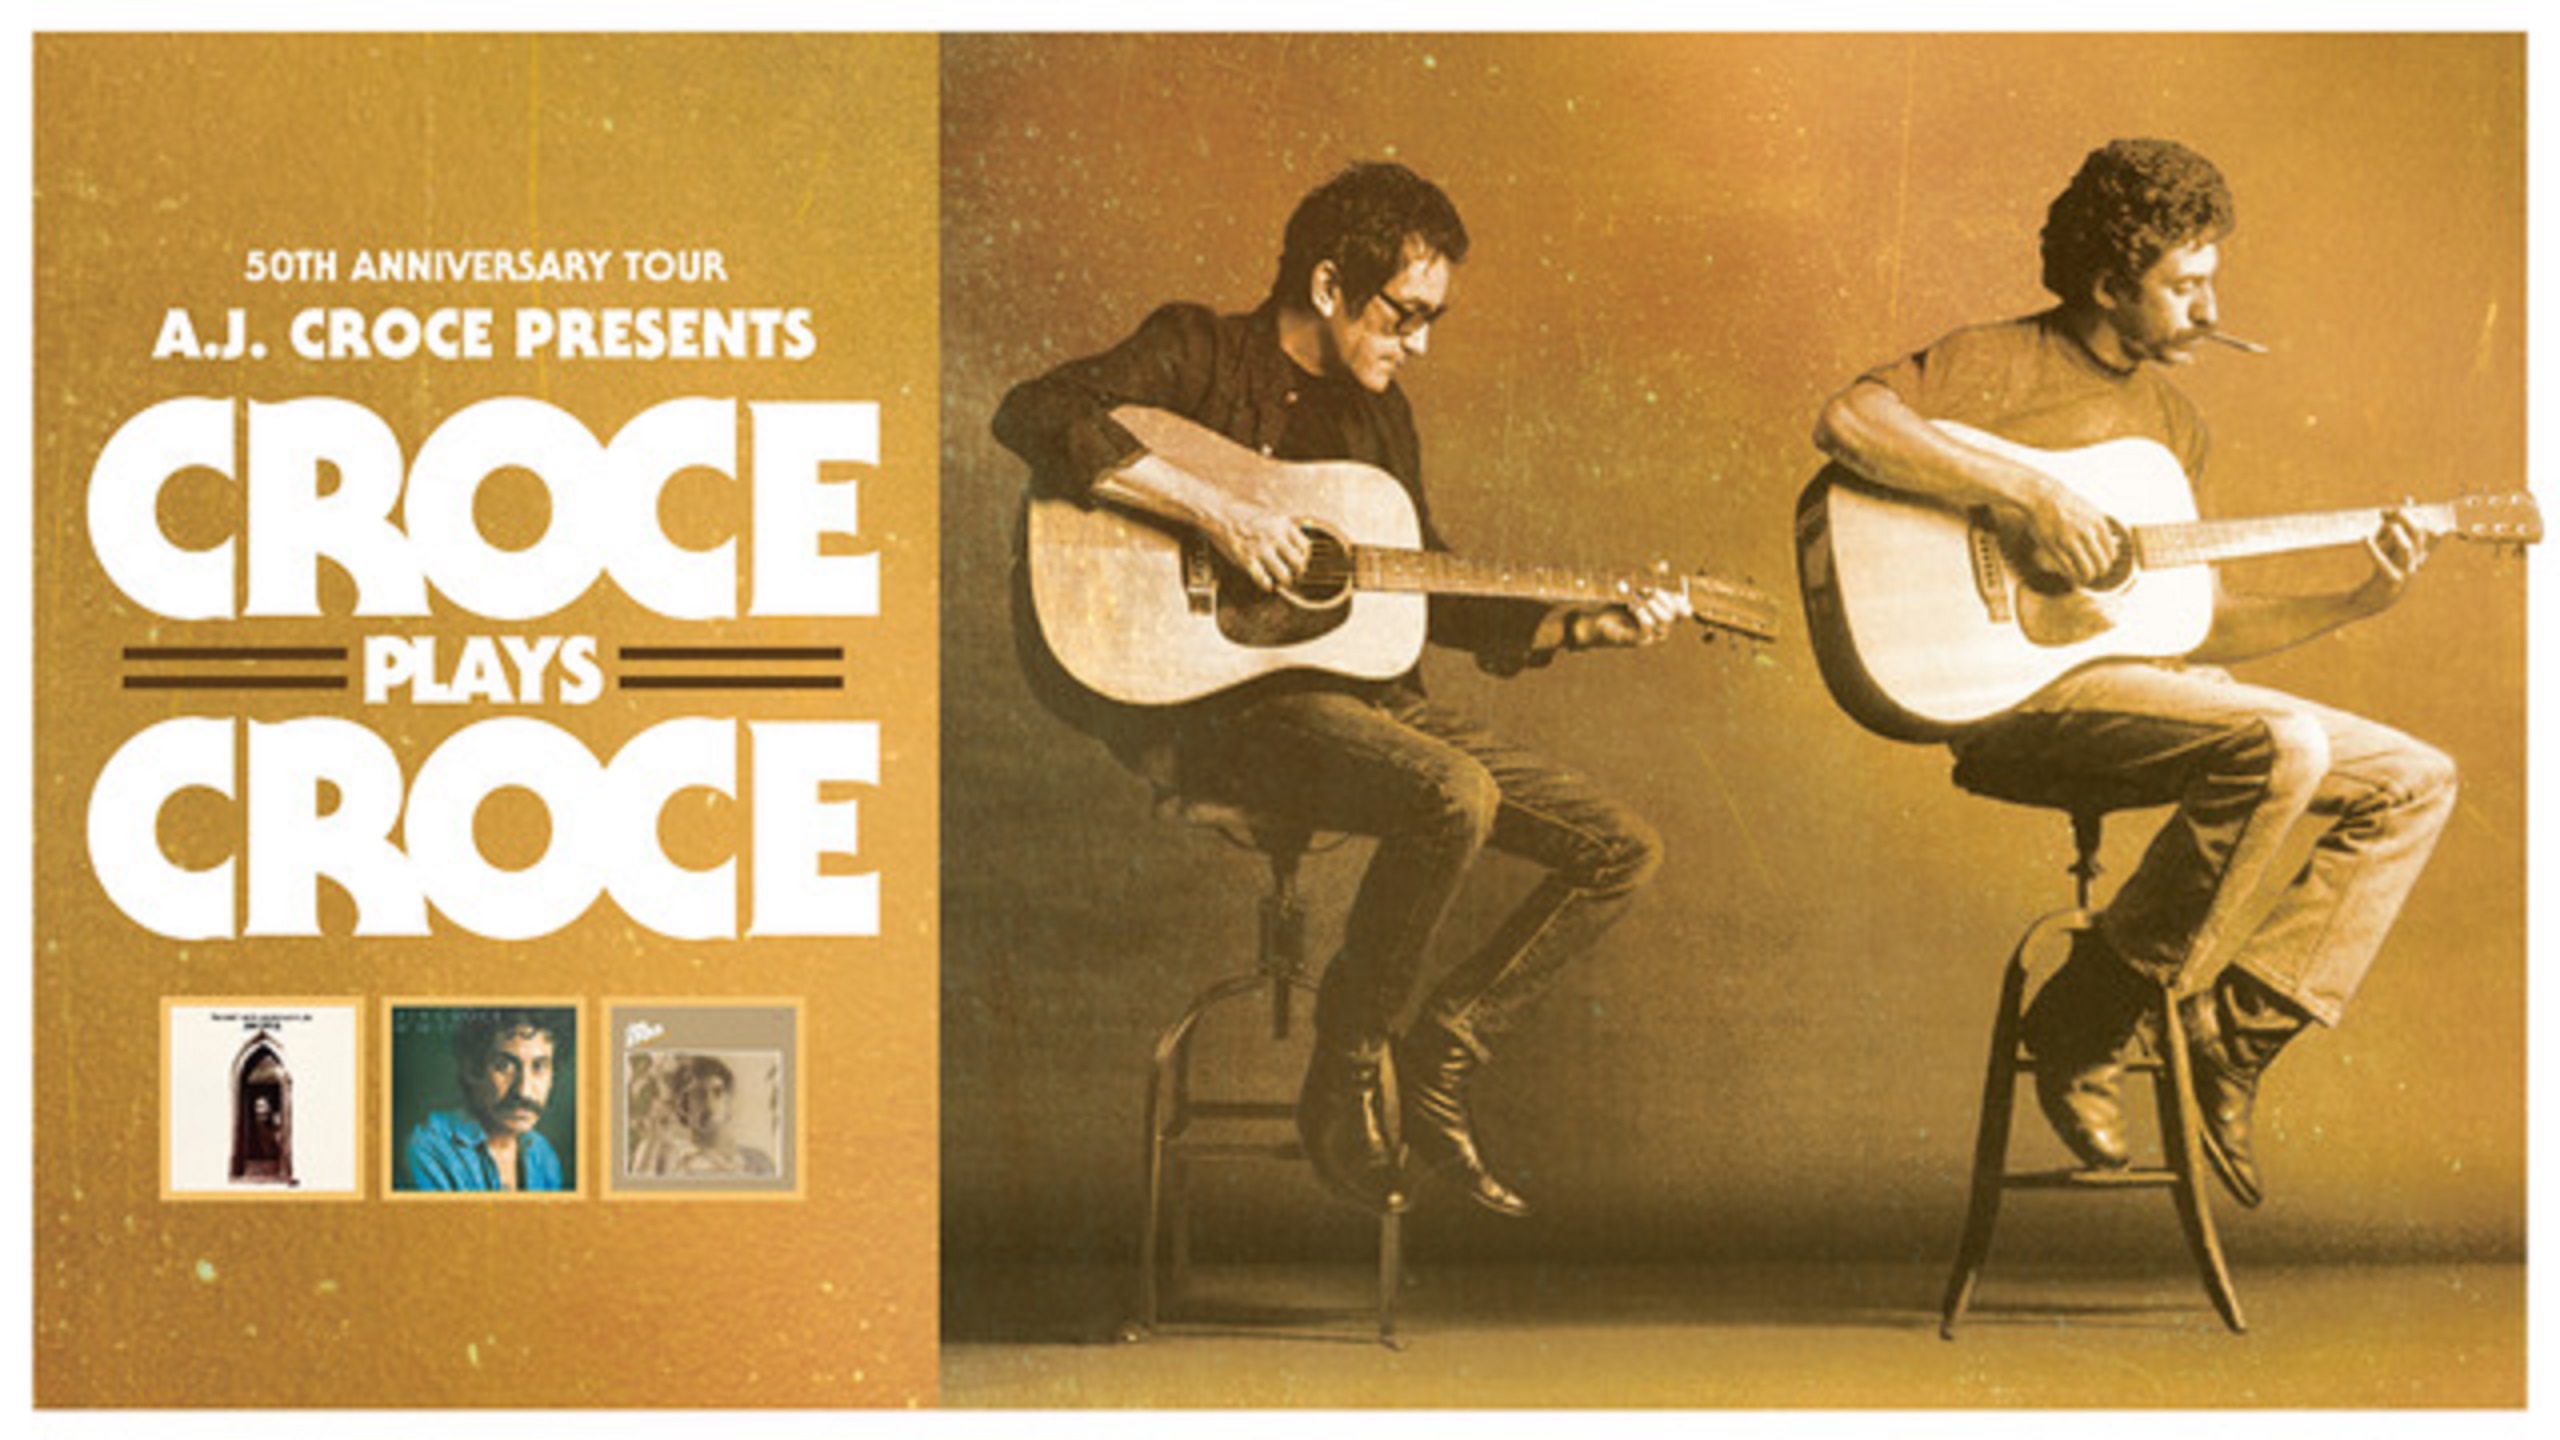 SINGER/SONGWRITER A.J. CROCE ANNOUNCES DATES FOR 2023 CROCE PLAYS CROCE 50TH ANNIVERSARY TOUR